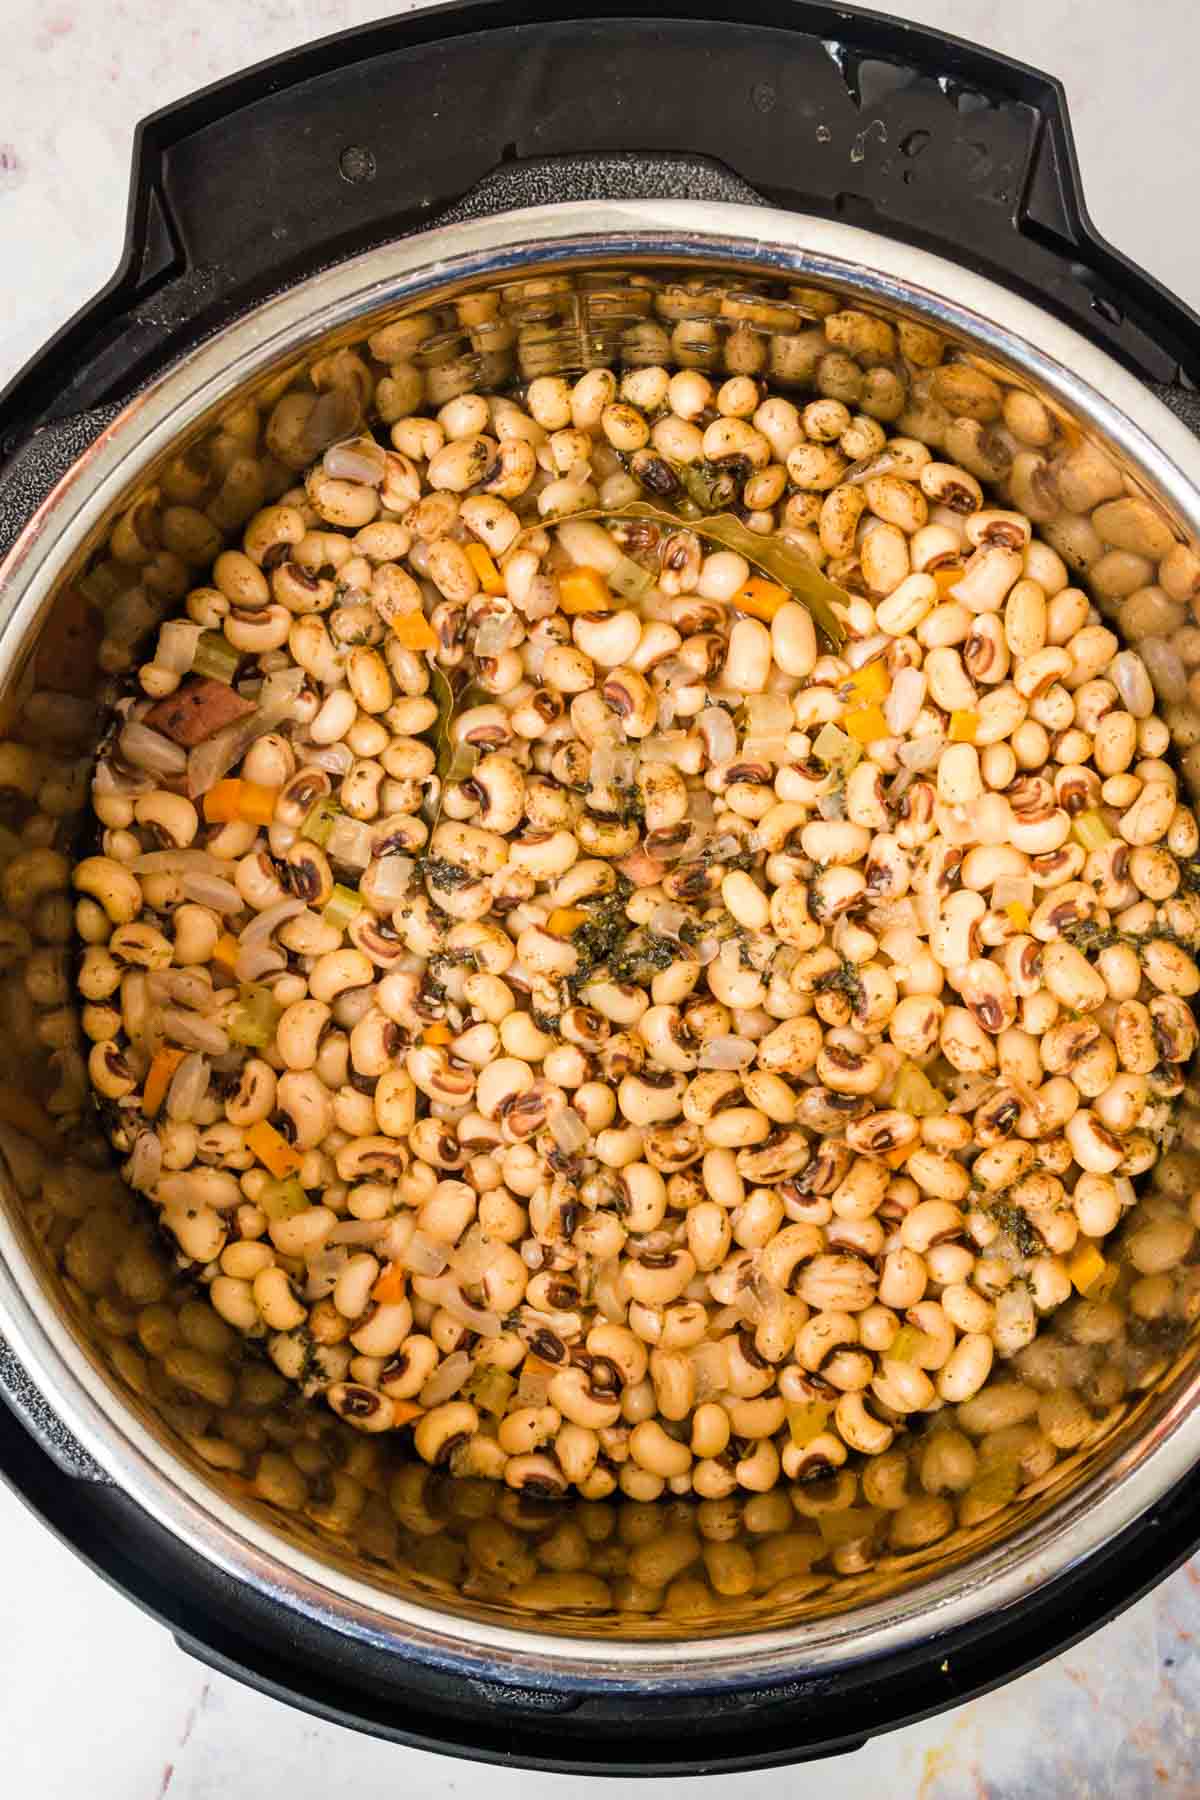 Pressure cooked black eyed peas in the bowl of an Instant Pot.